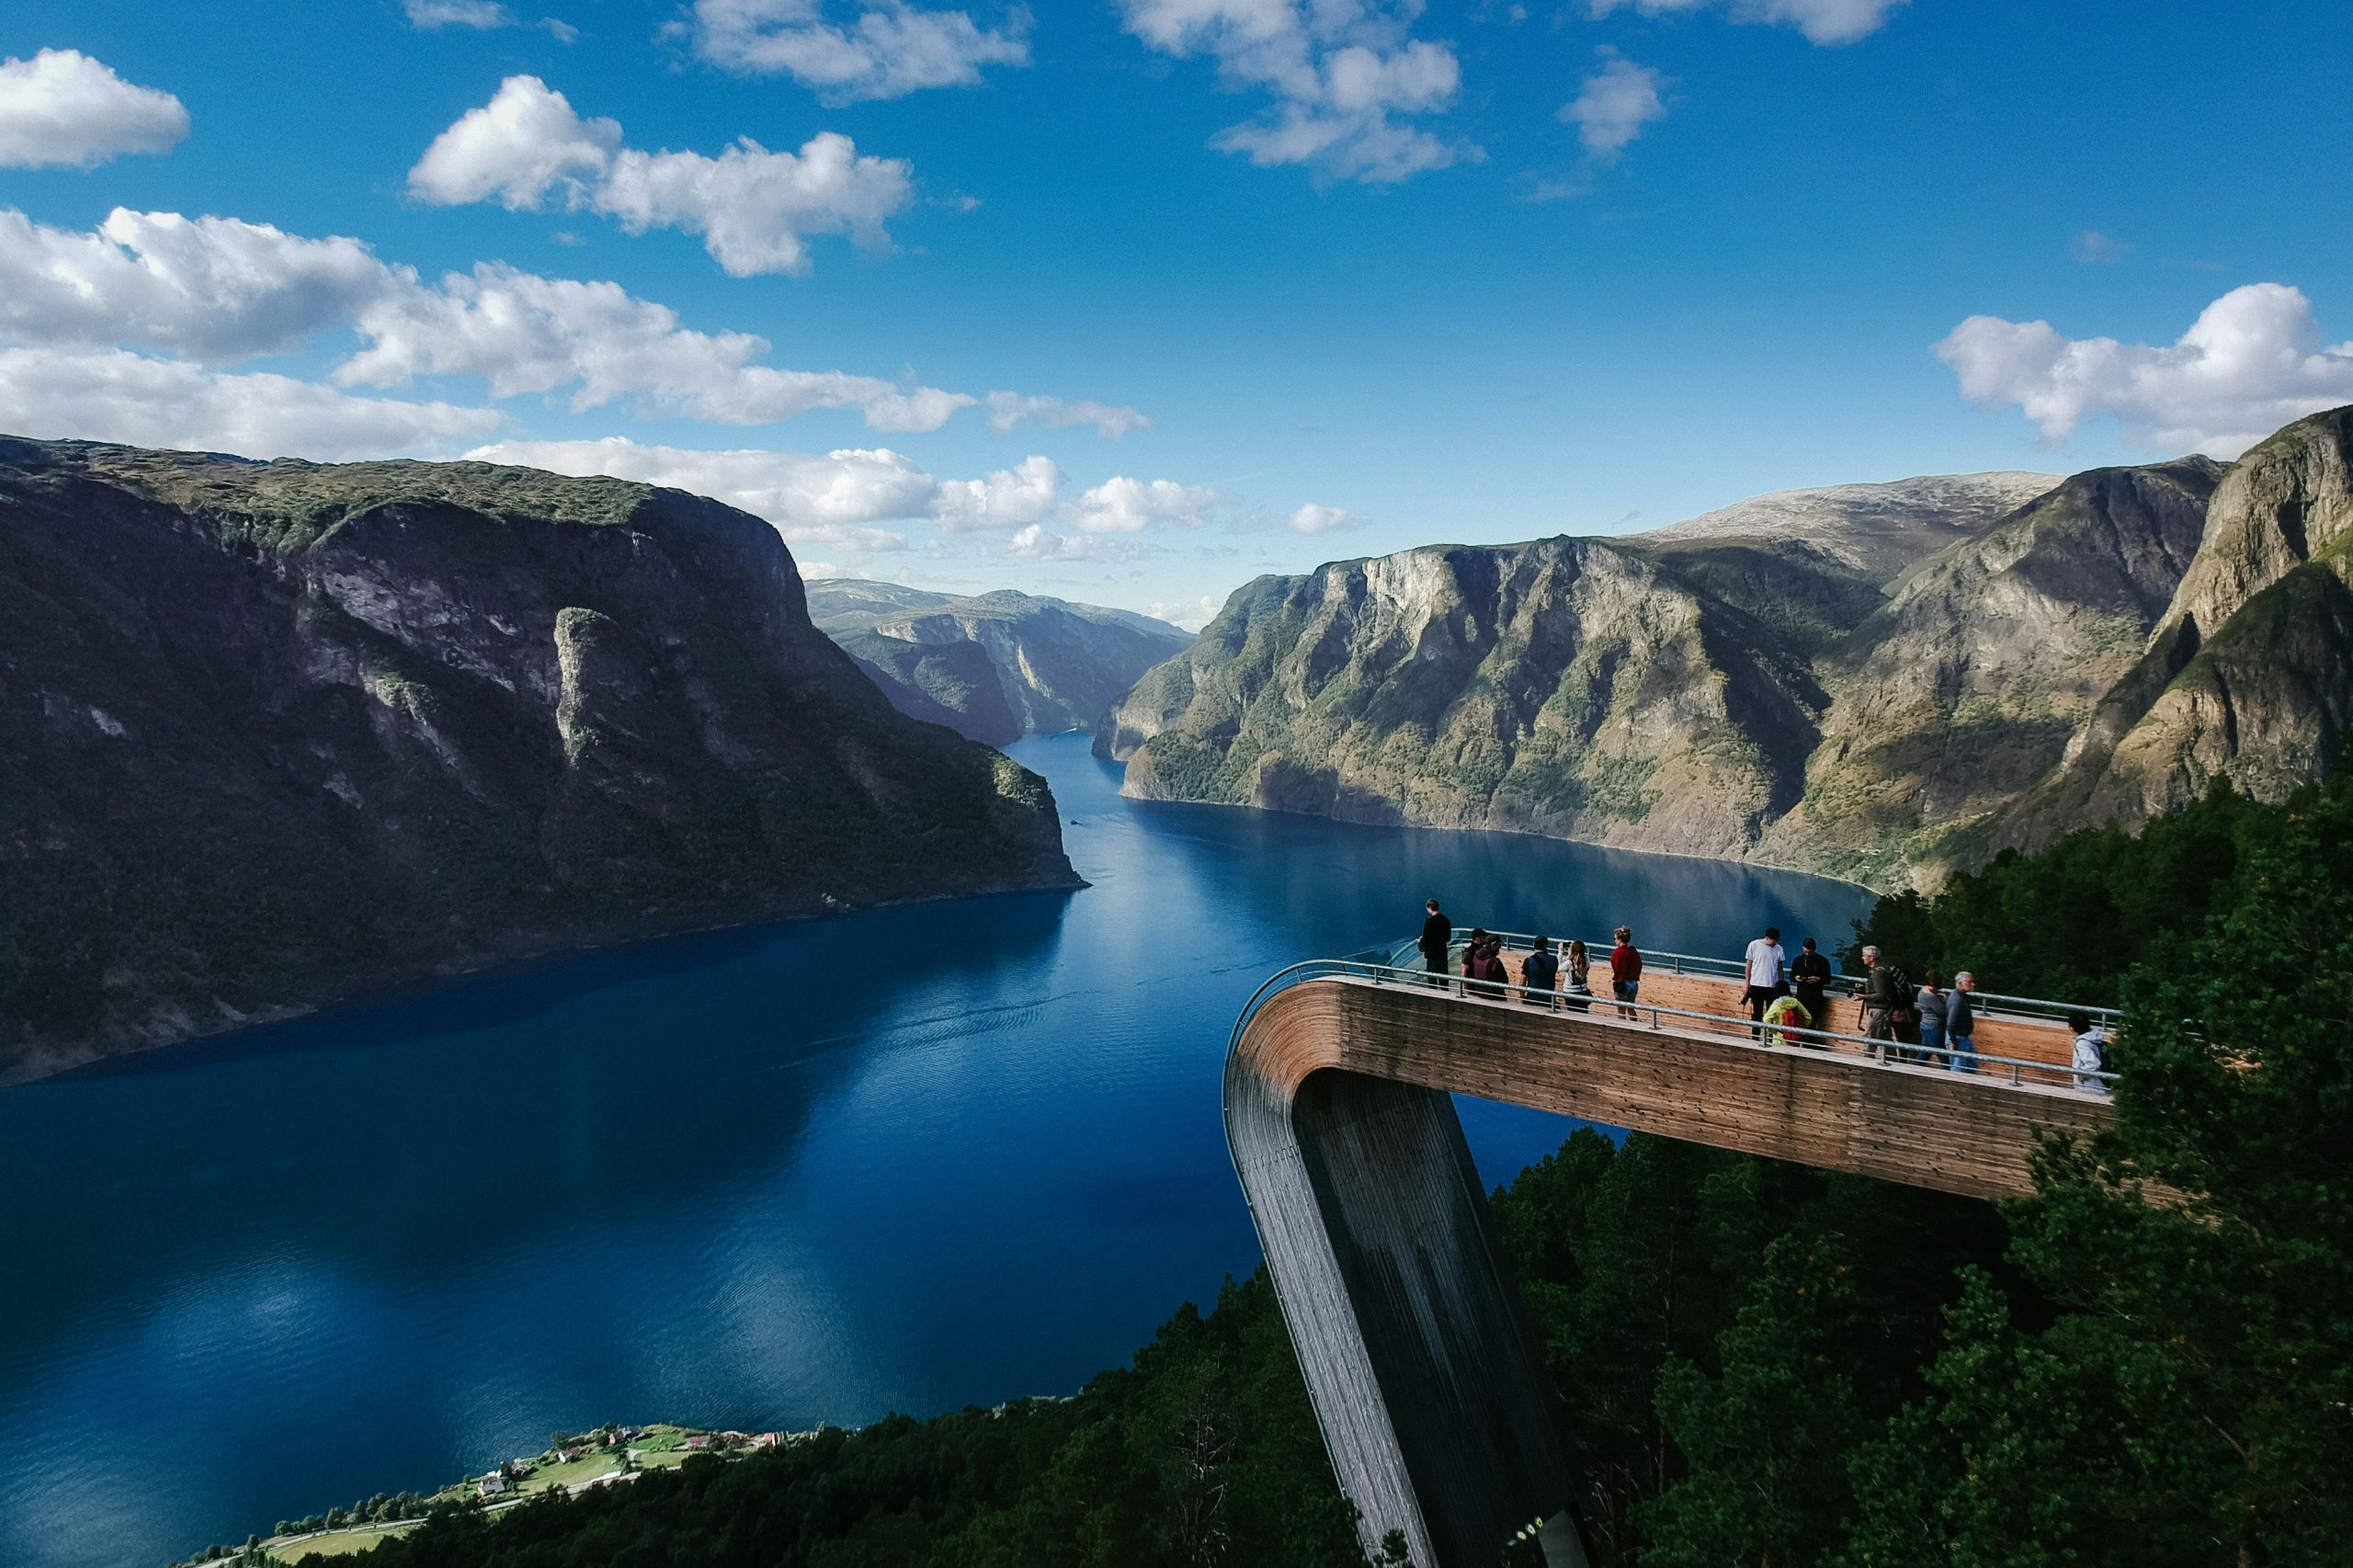 explore the breathtaking fjords and stunning landscapes of norway with our fjords travel guide. discover the beauty of these natural wonders and plan your next adventure with us.